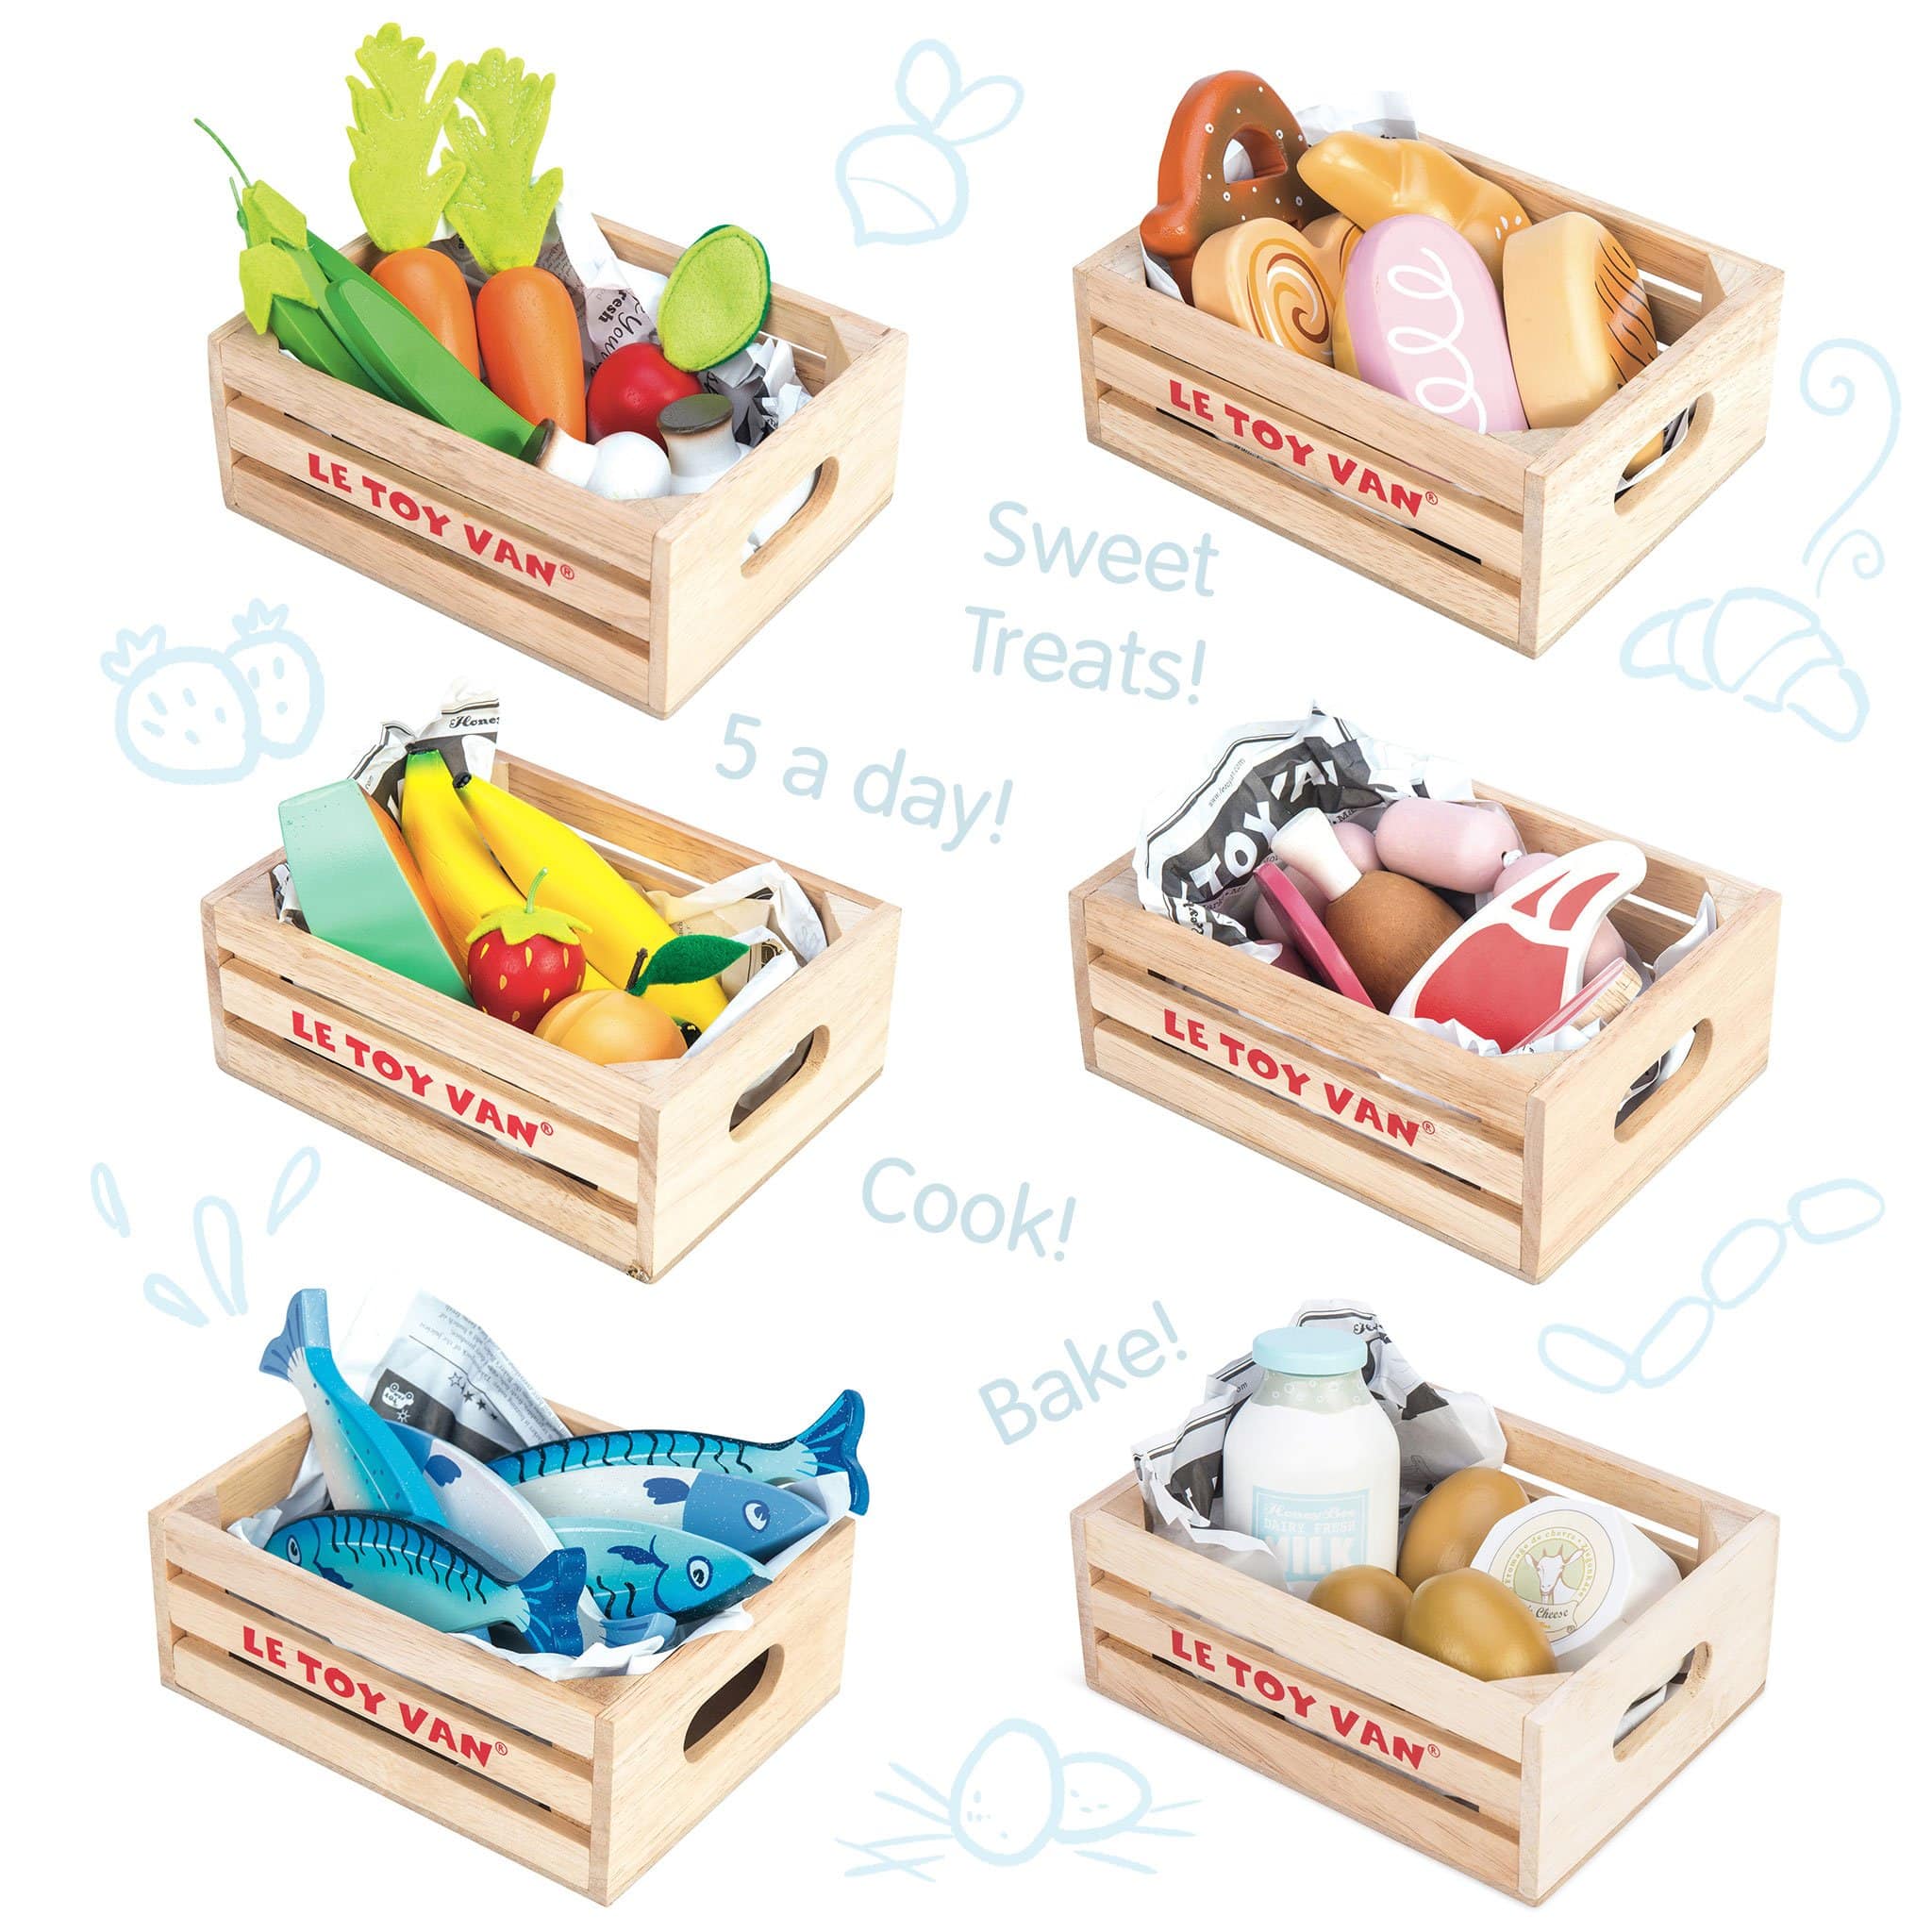 Le Toy Van Market Crate Set - Baby and 